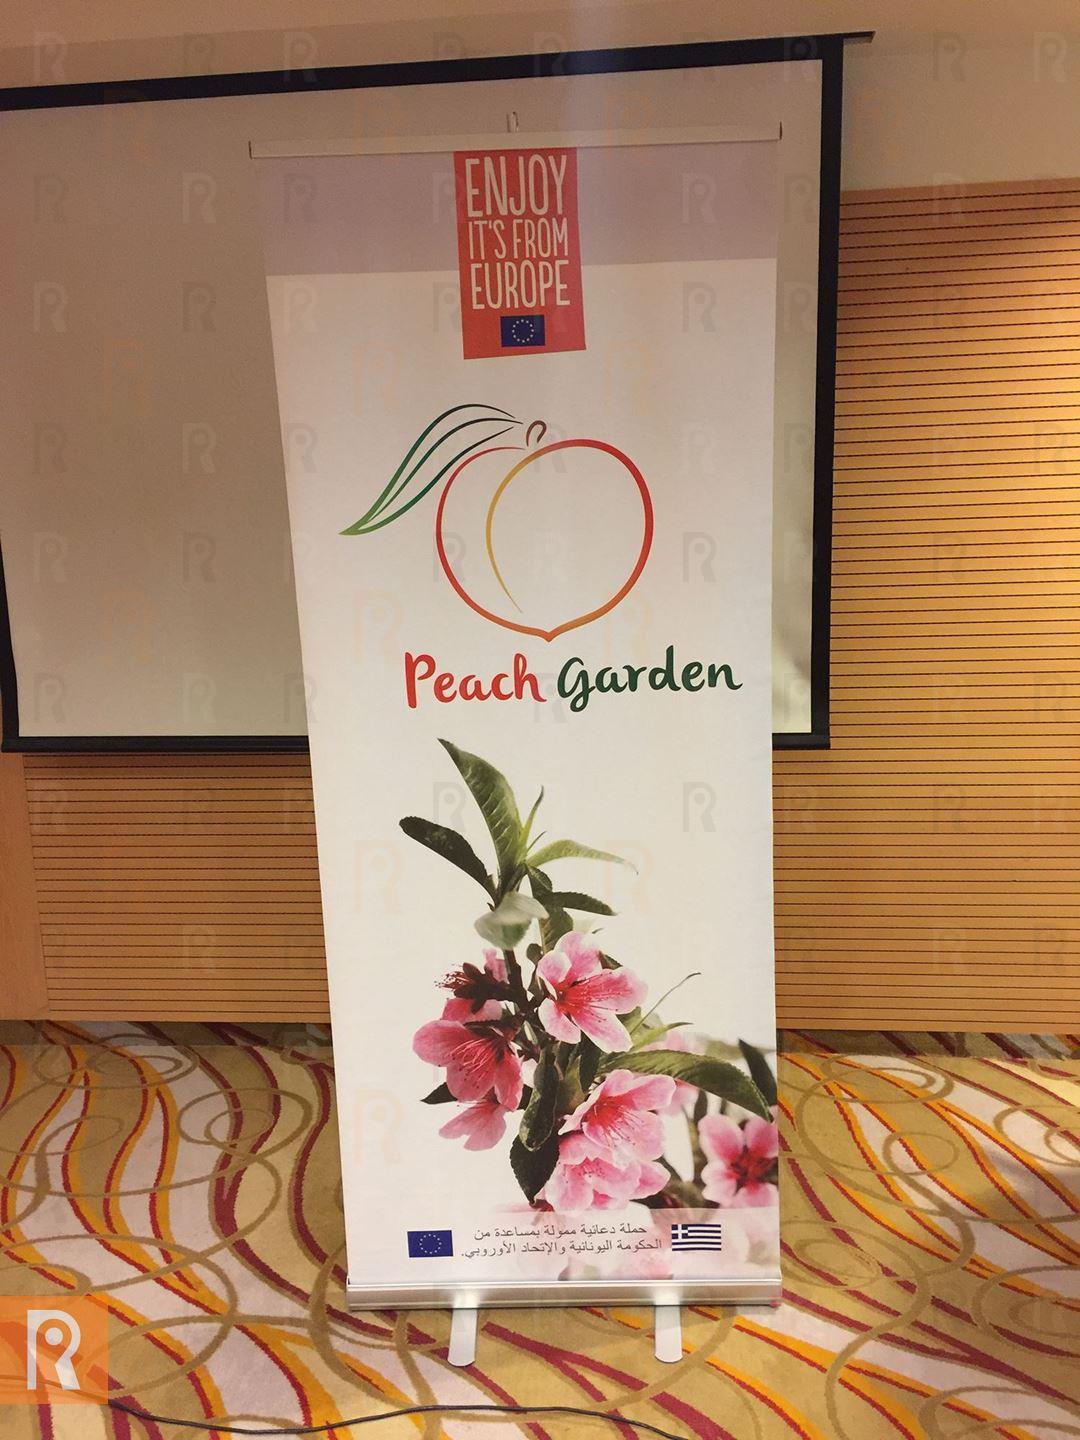 "PEACH GARDEN" Promotes Fresh Peaches in Kuwait For the 3rd Consecutive Year